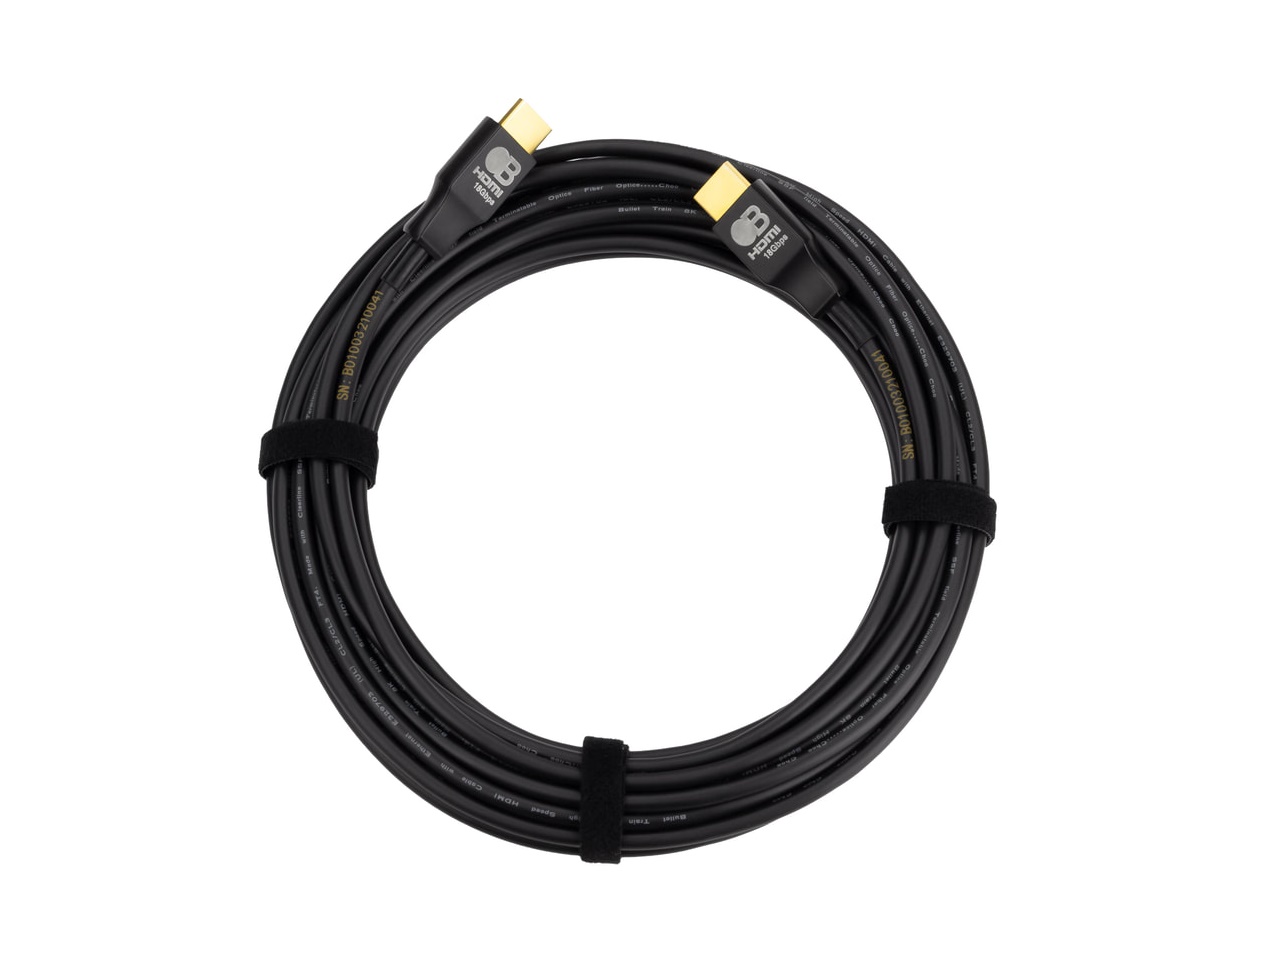 AC-BTSSF-5KUHD-30 30m/98.4ft Premium Active Optical HDMI Cable by AVPro Edge